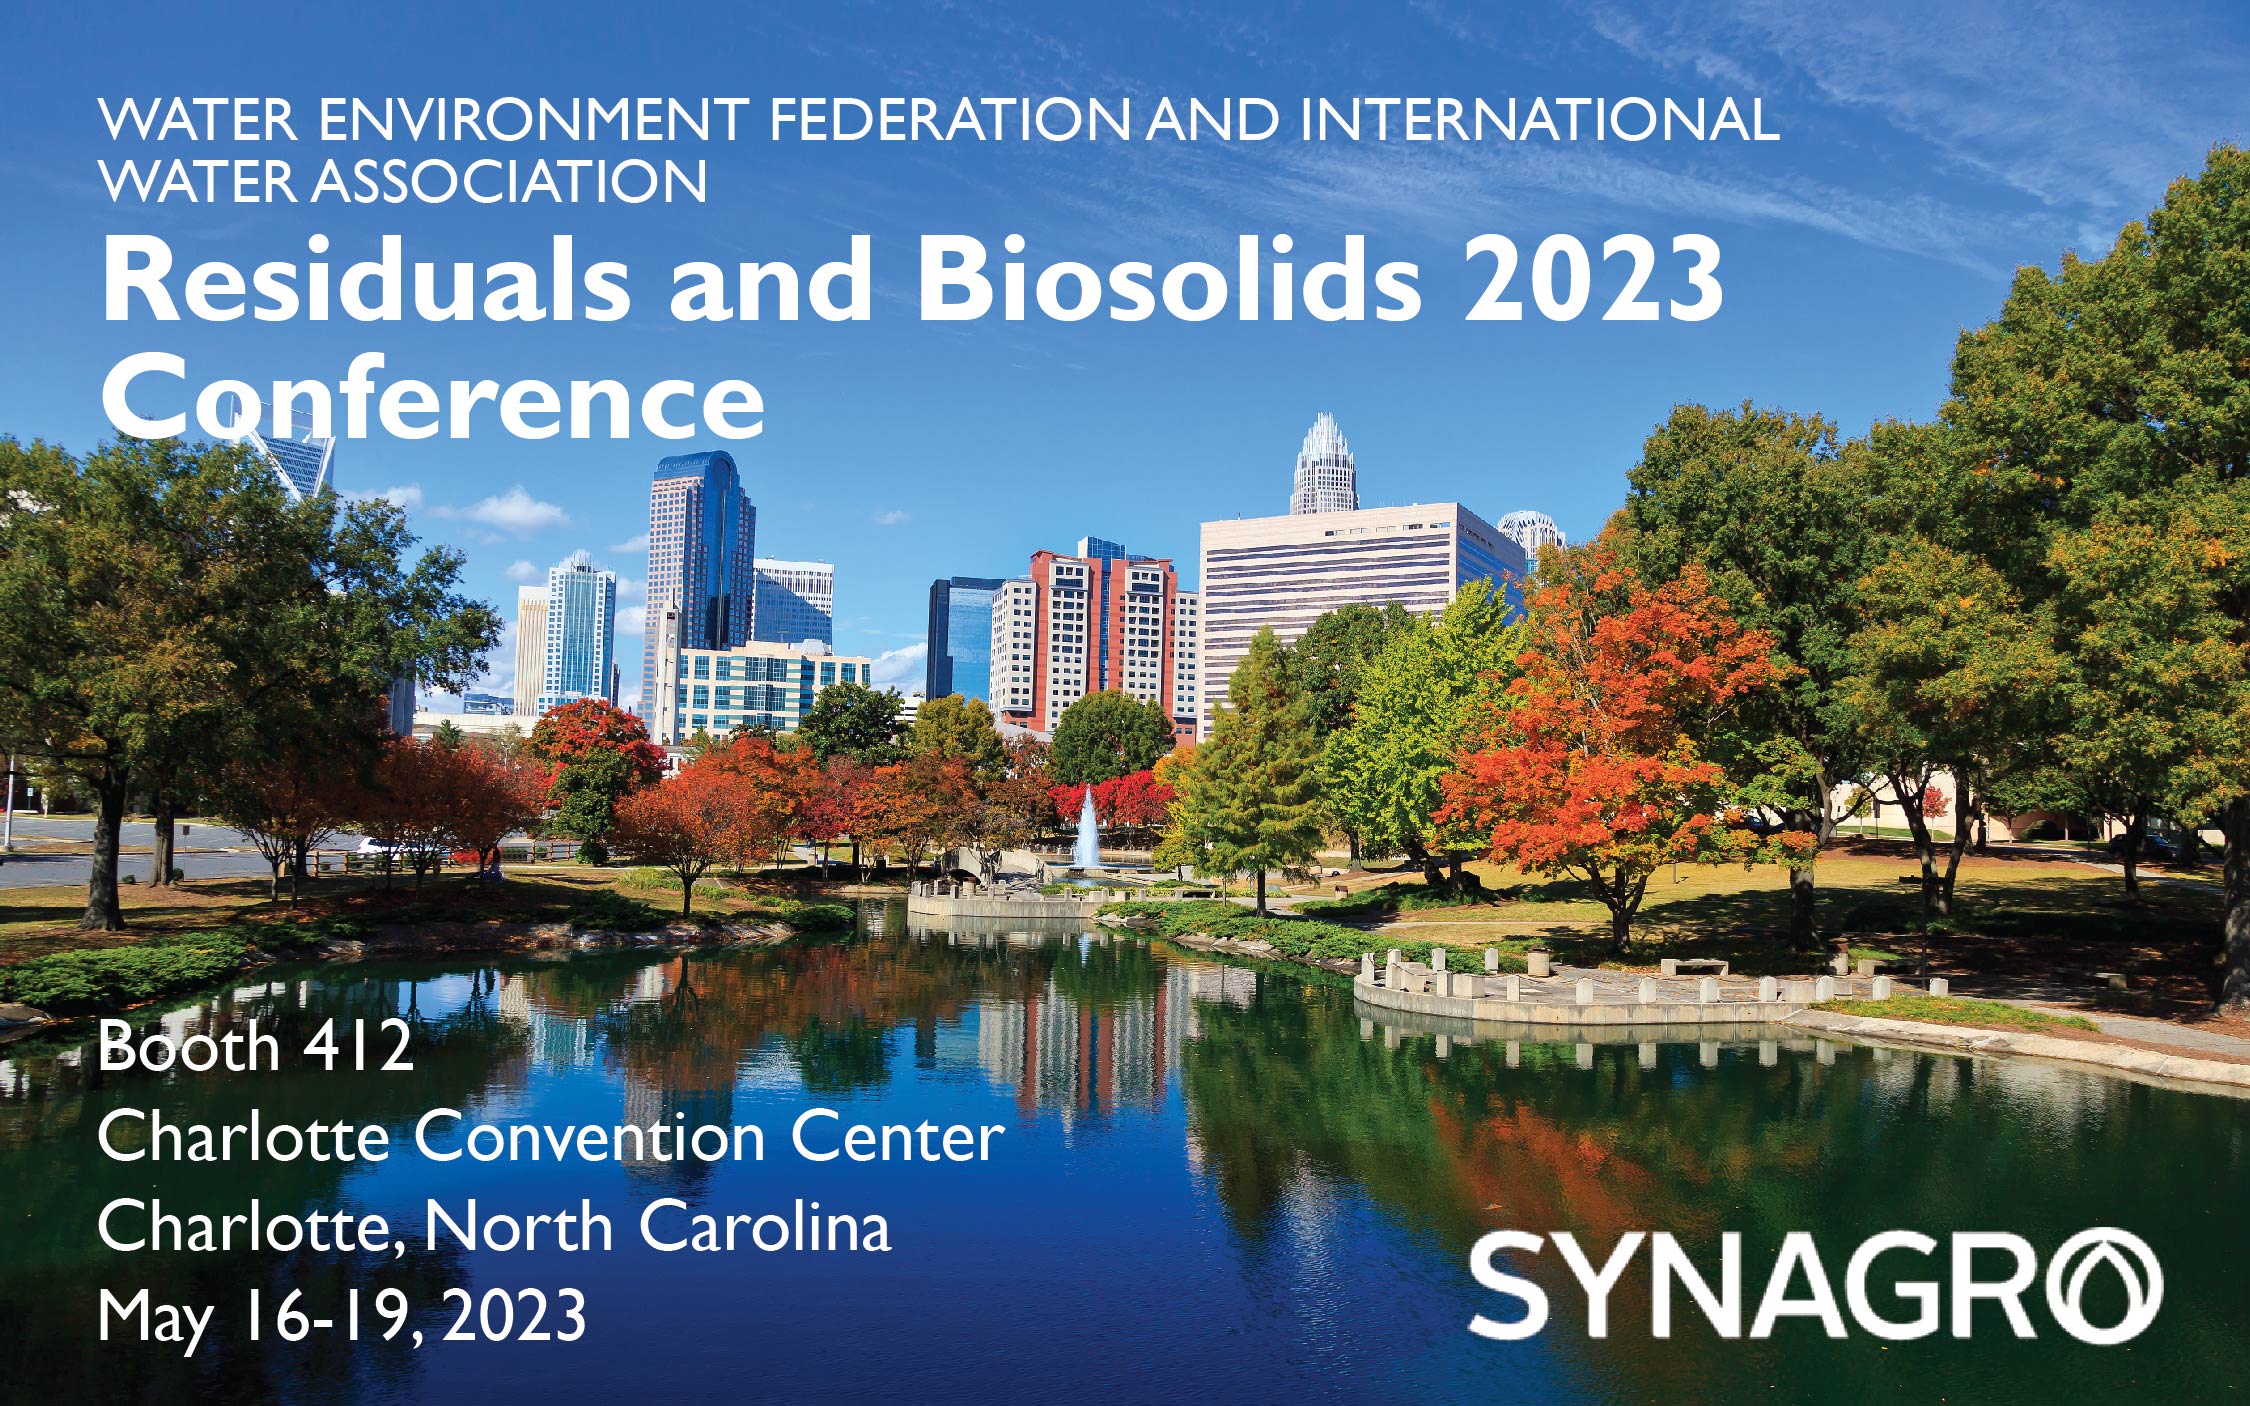 Synagro to Highlight Products and Services at Residuals and Biosolids